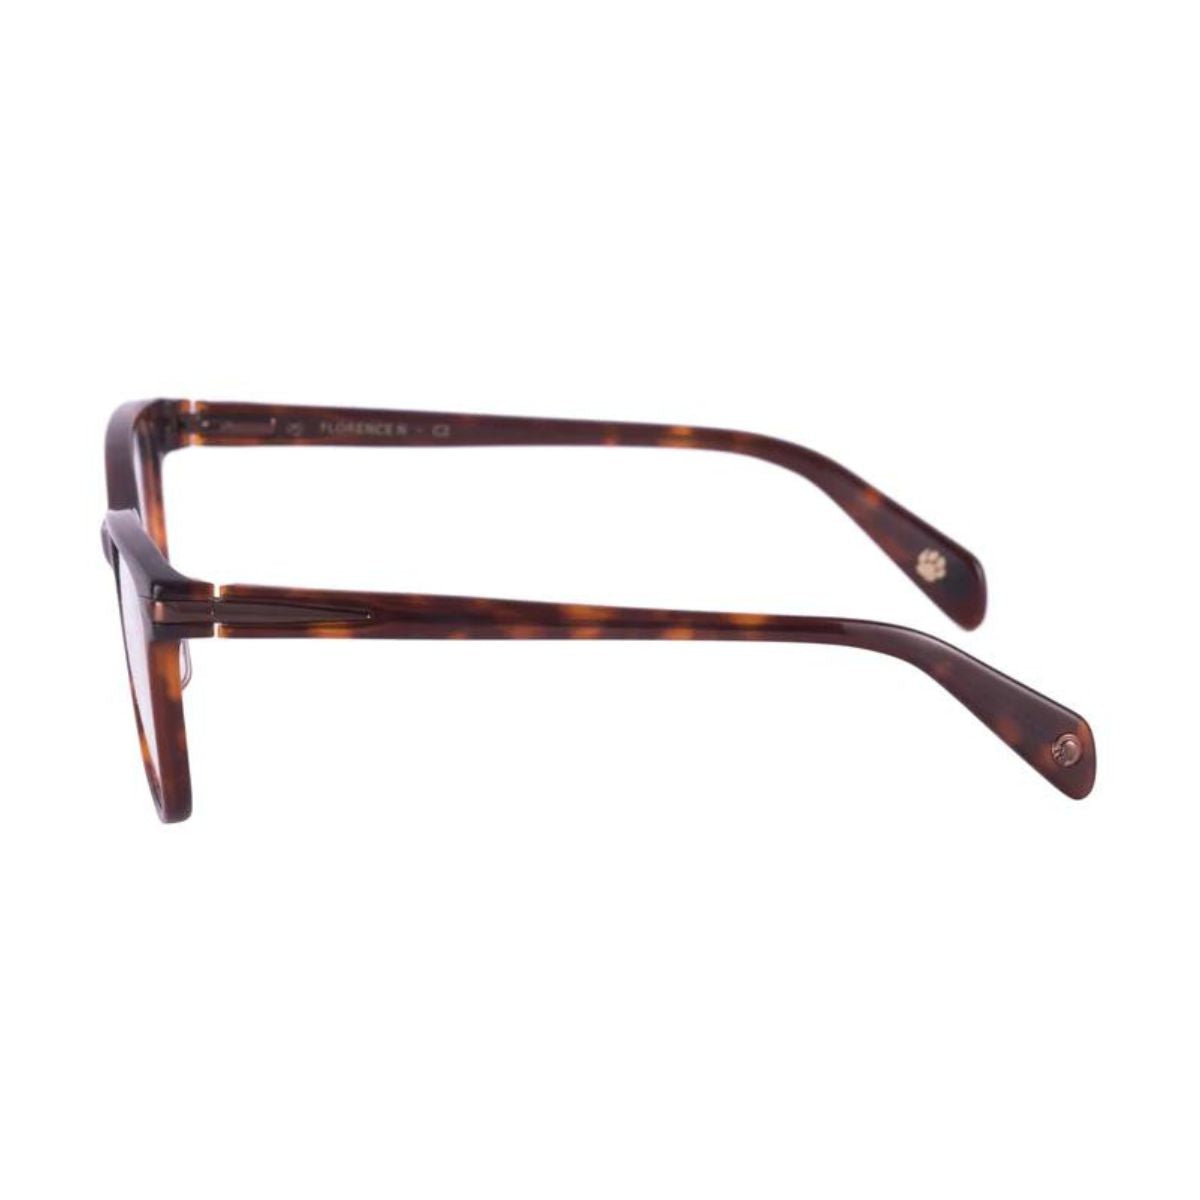 "The Monk Florence C2 cat eye glasses frame for women's online at optorium"